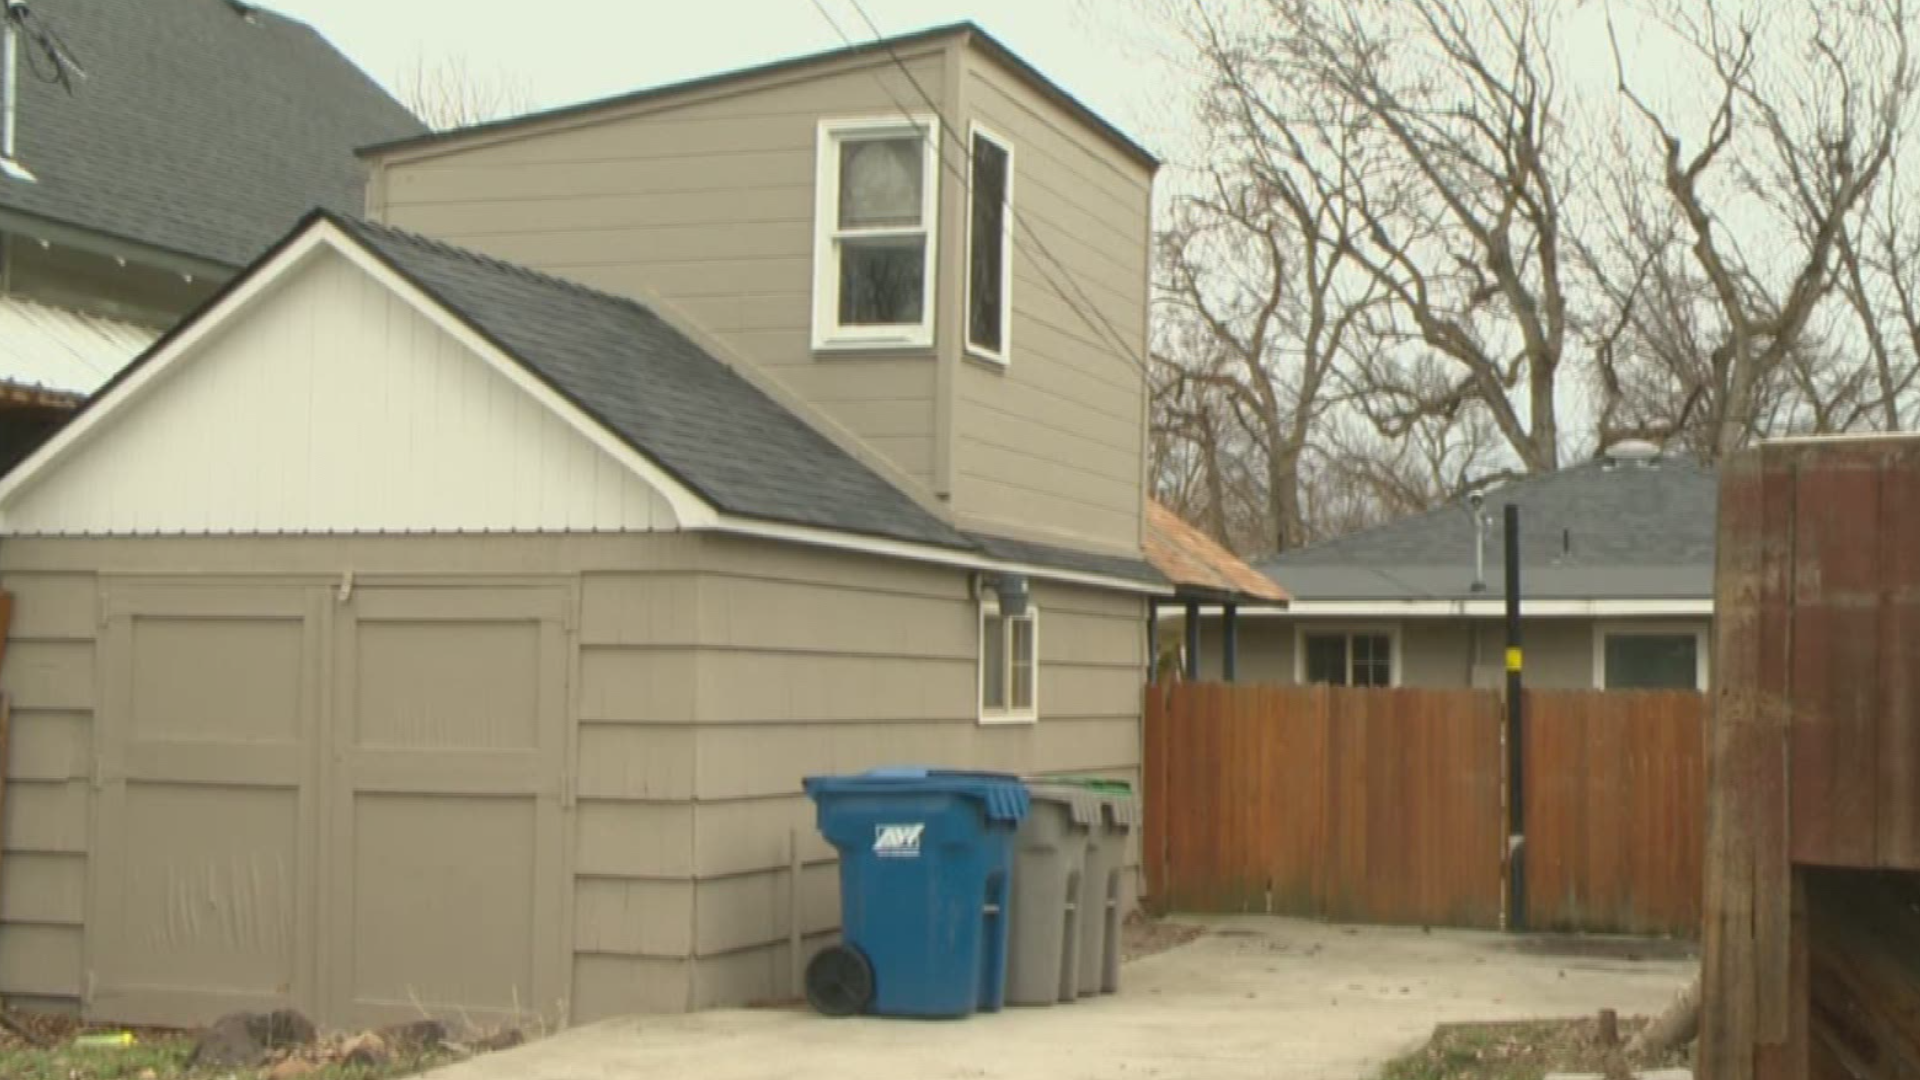 With a housing shortage continuing, Boise city officials are considering scrapping some of the restrictions and requirements on accessory dwelling units in order to encourage the creation of more housing units throughout Boise.